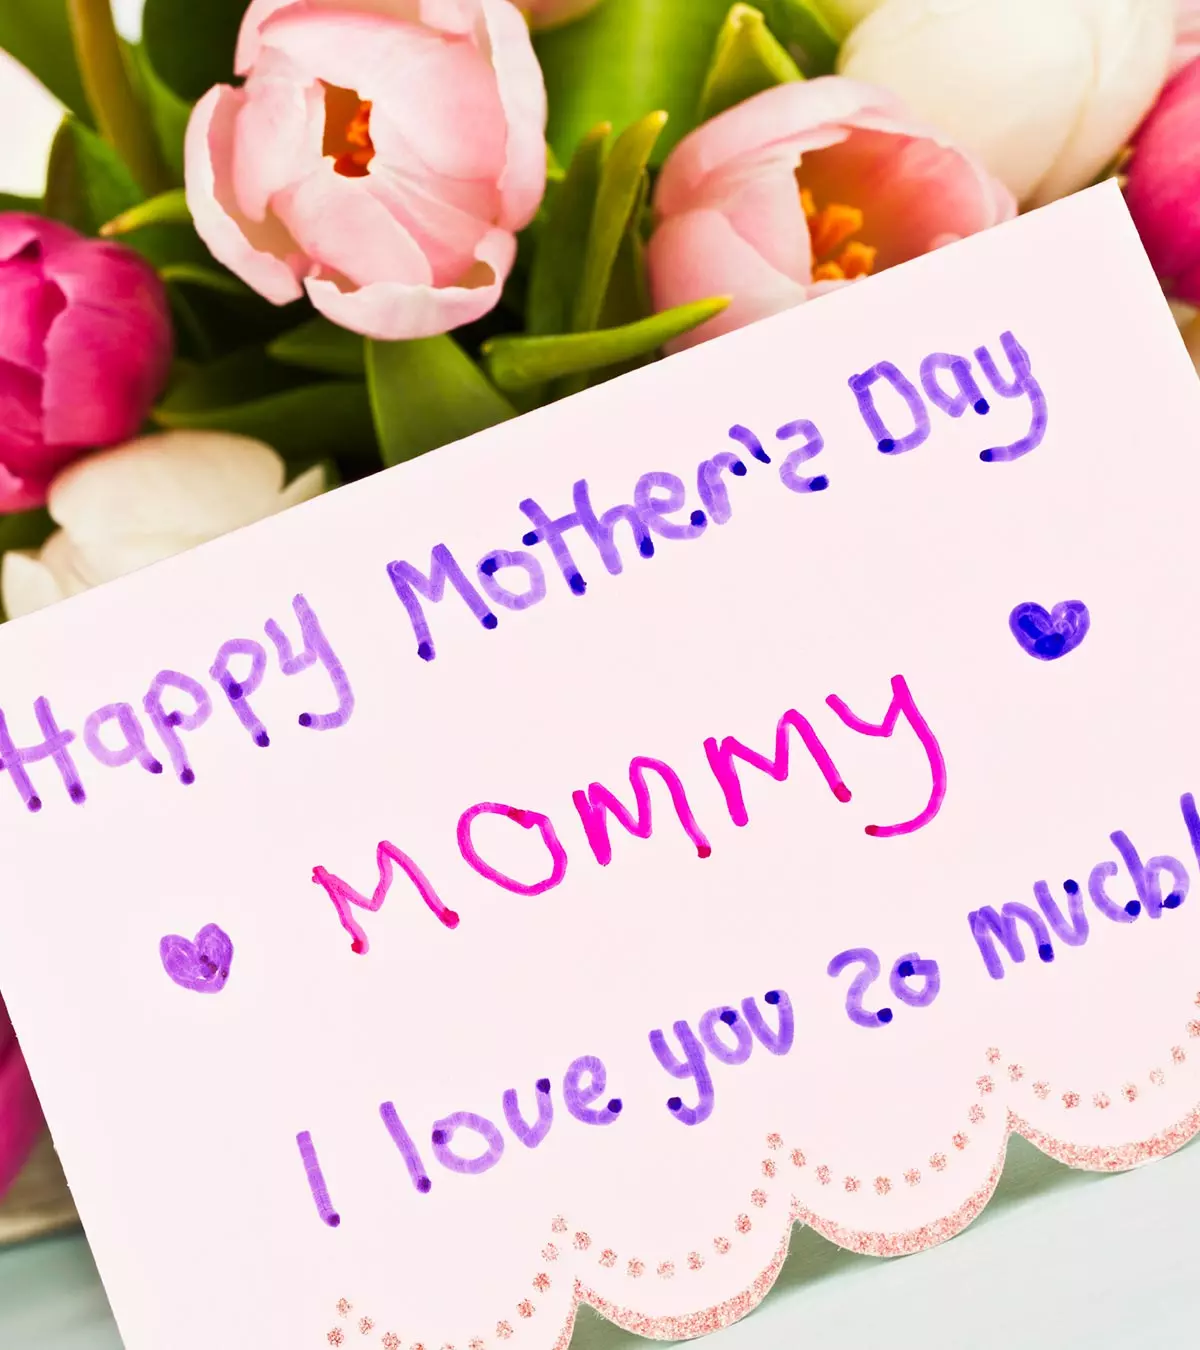 100 Heart-Touching Mother's Day Quotes & Wishes